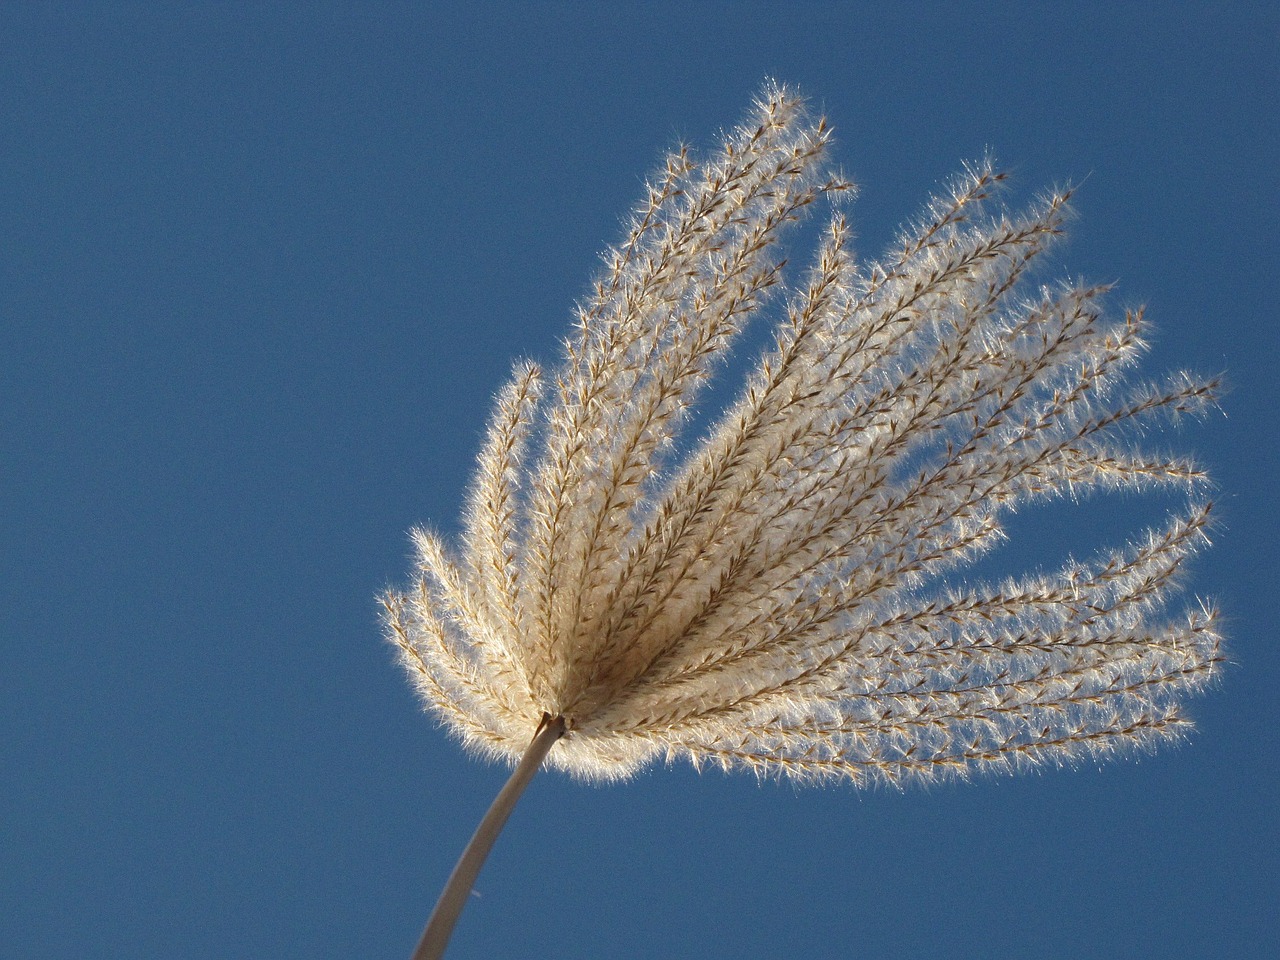 flowering miscanthus sky free photo